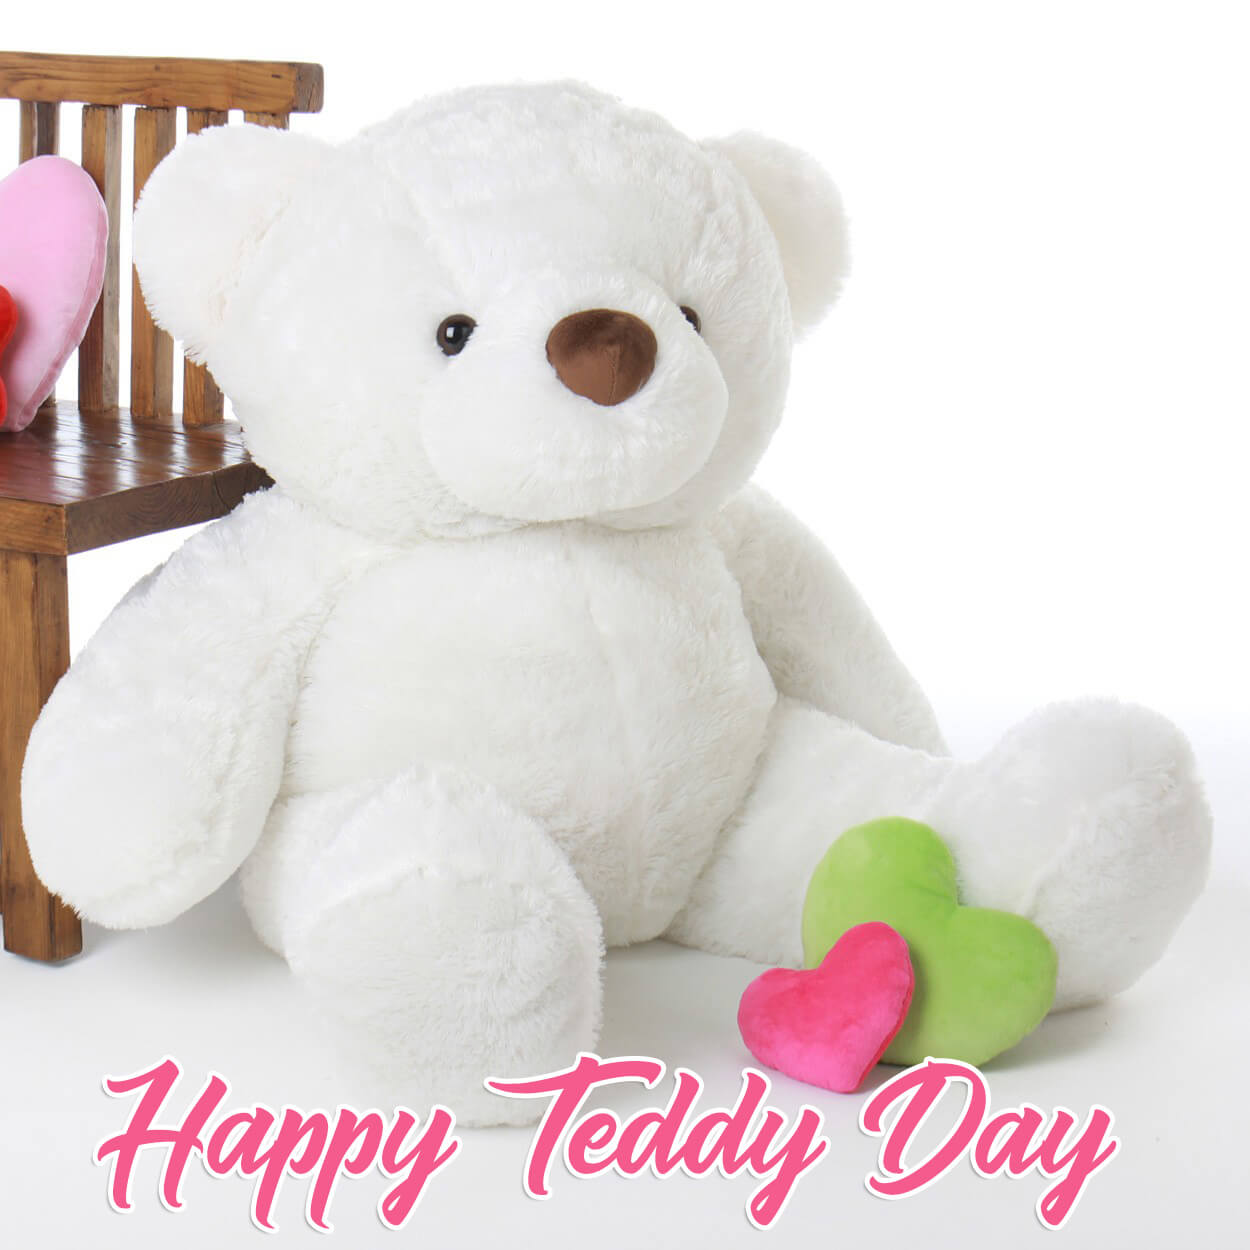 Happy Teddy Day Wishes Cute Bear Large Image Background Hd Wallpaper